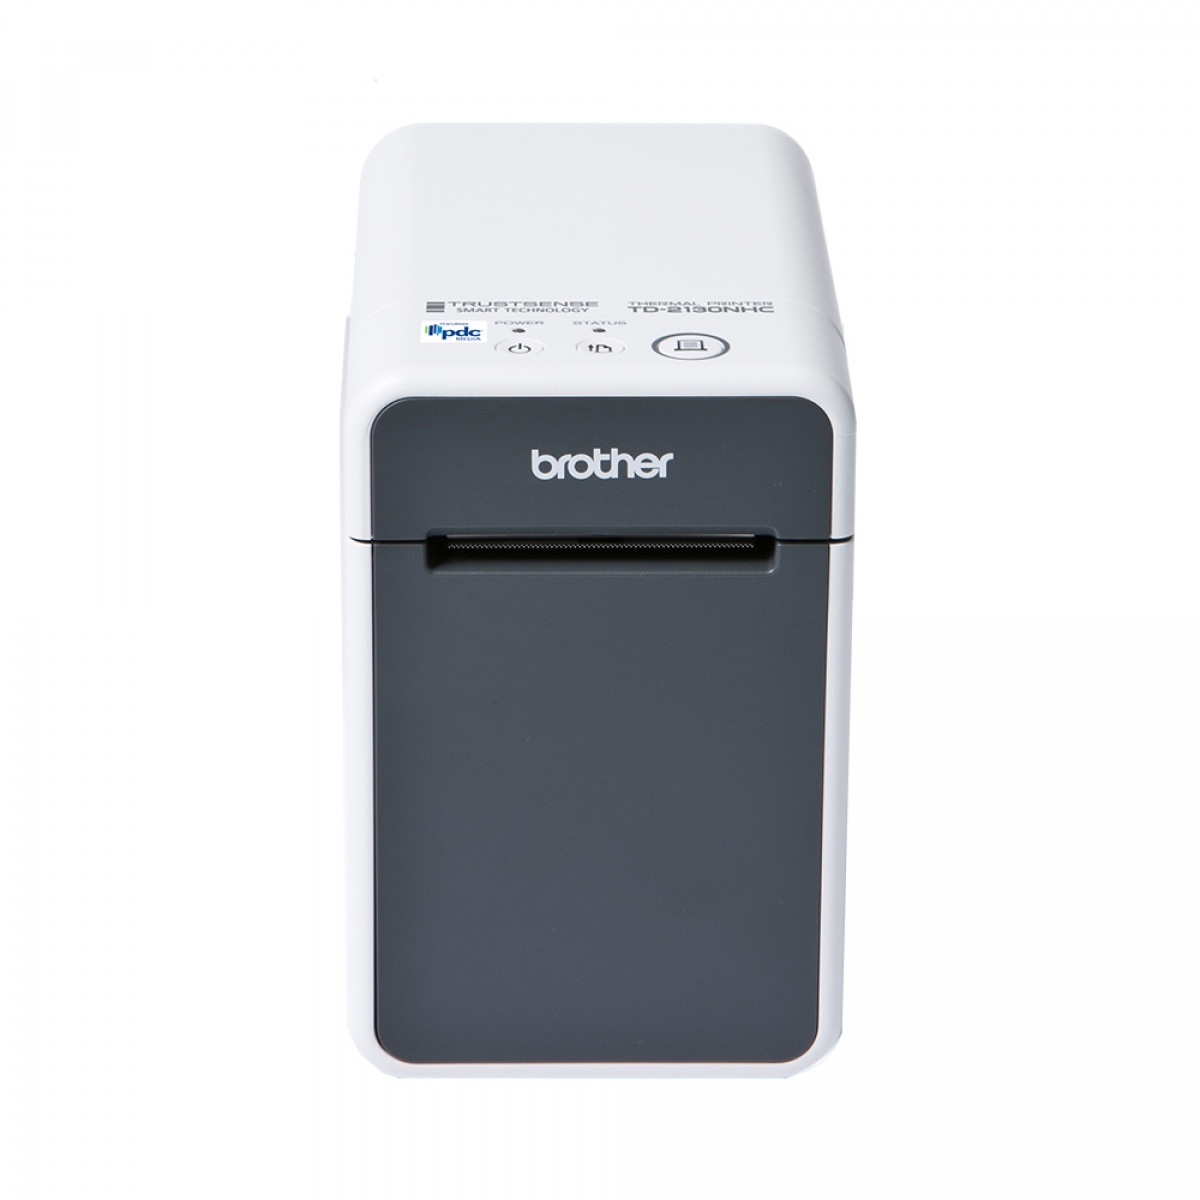 Brother TD-2130N wristband printer for clinical environments